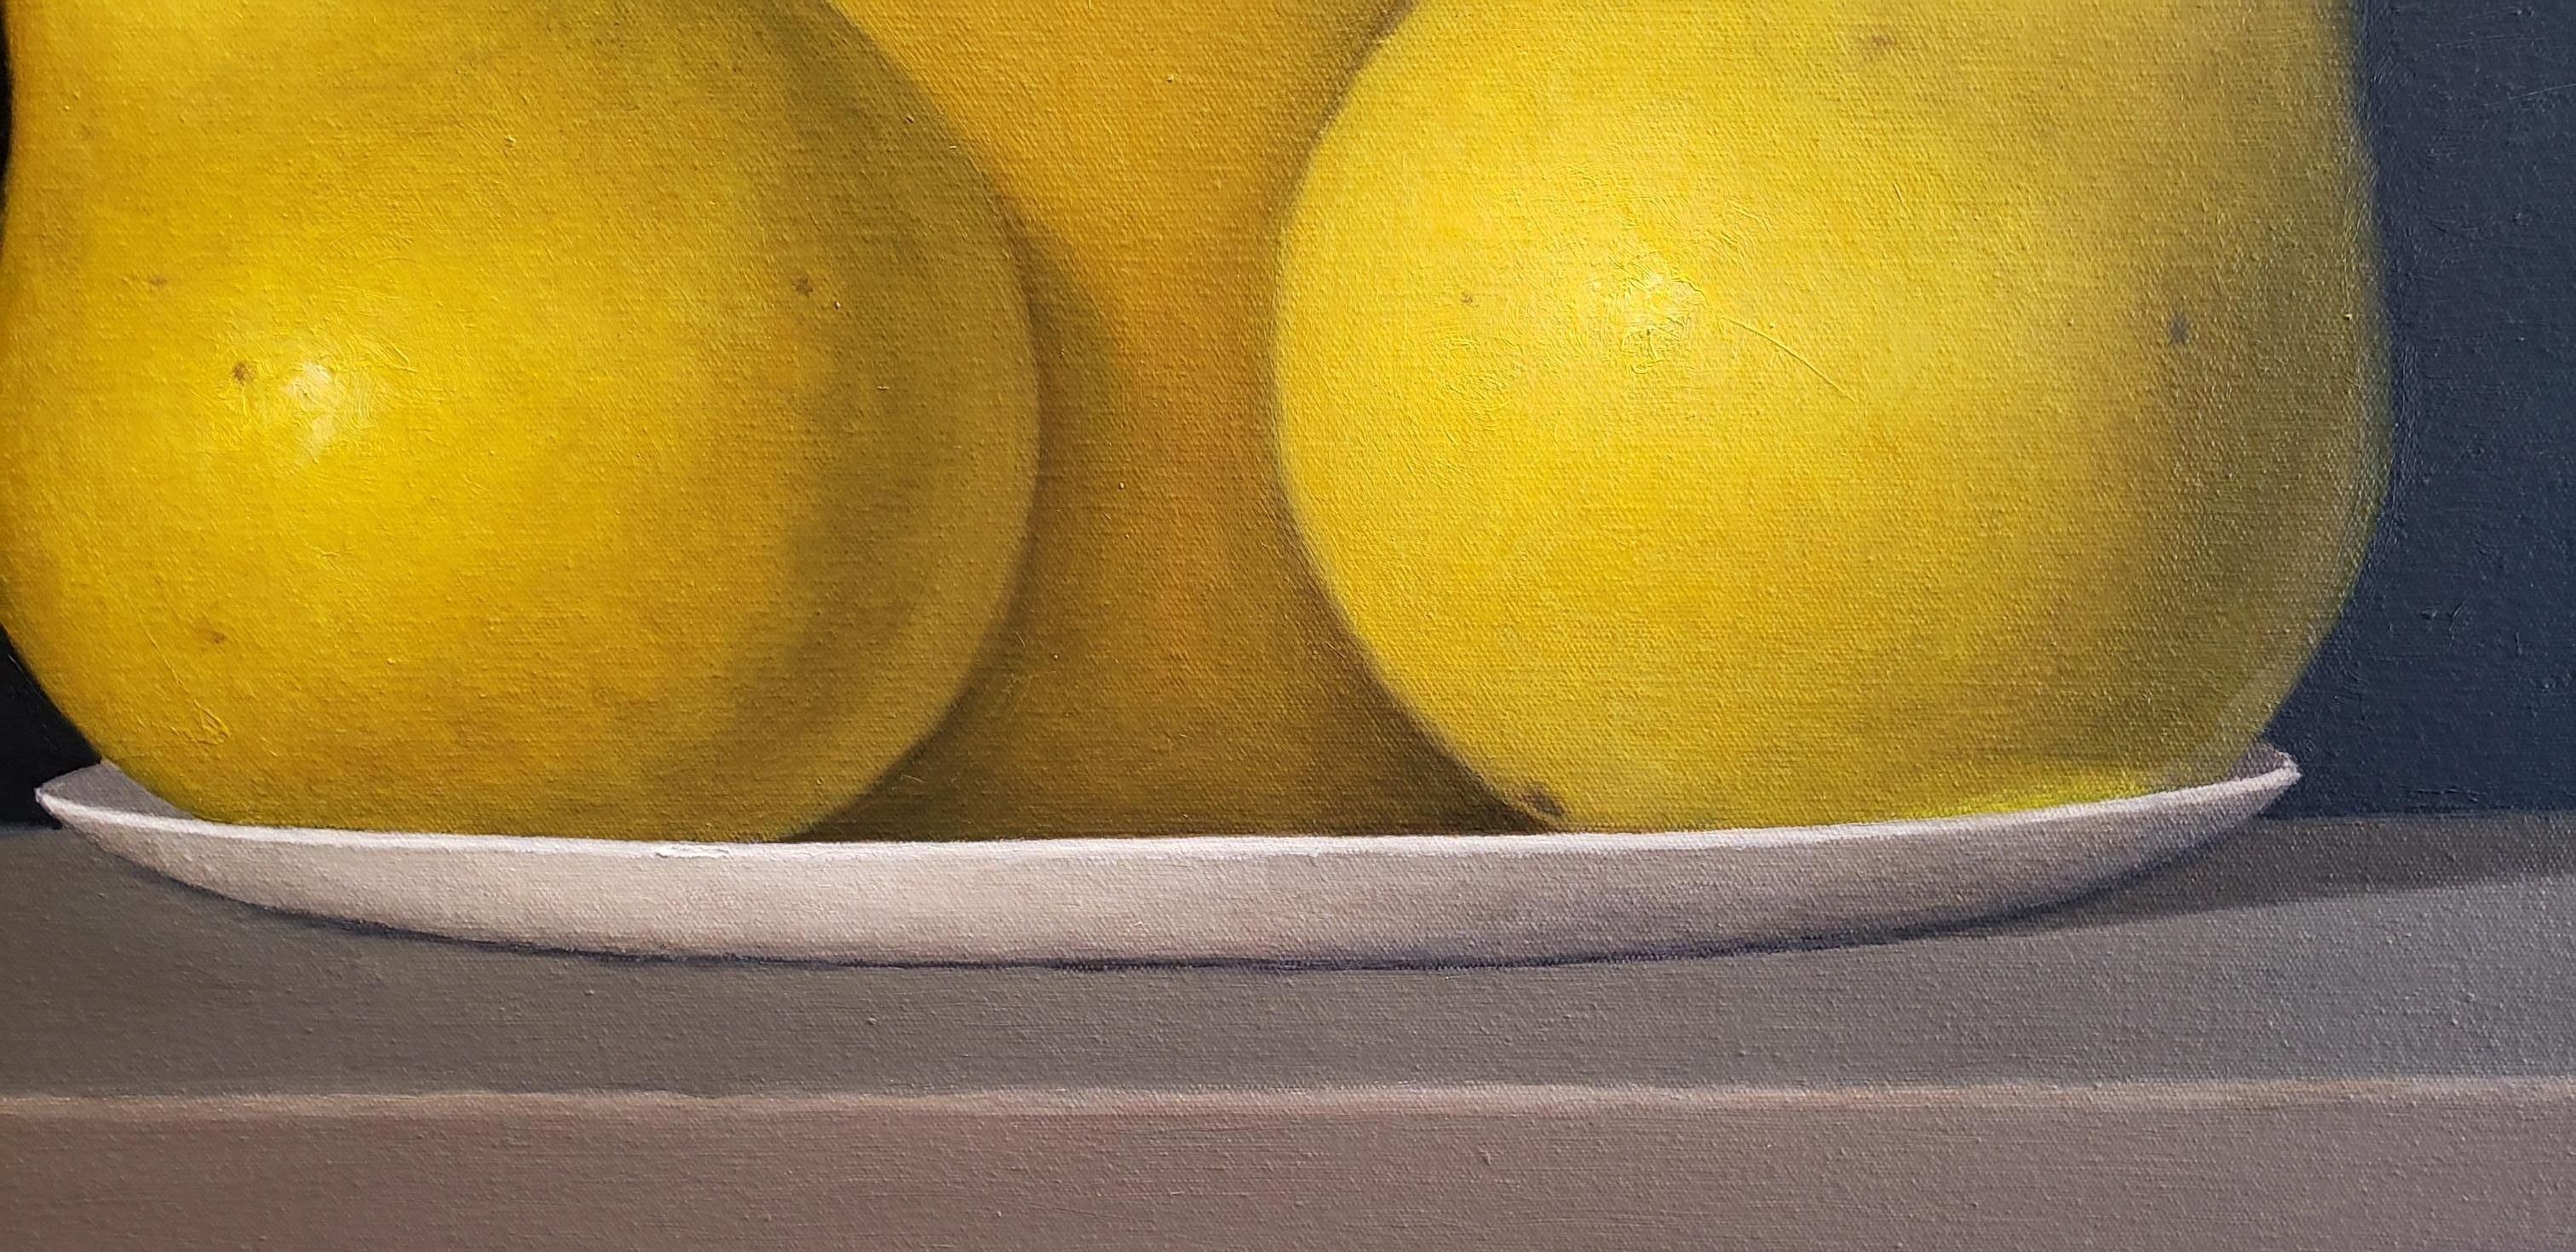 Three Pears on a Pewter Plate , oil painting, American Realism  - Realist Painting by David Harrison